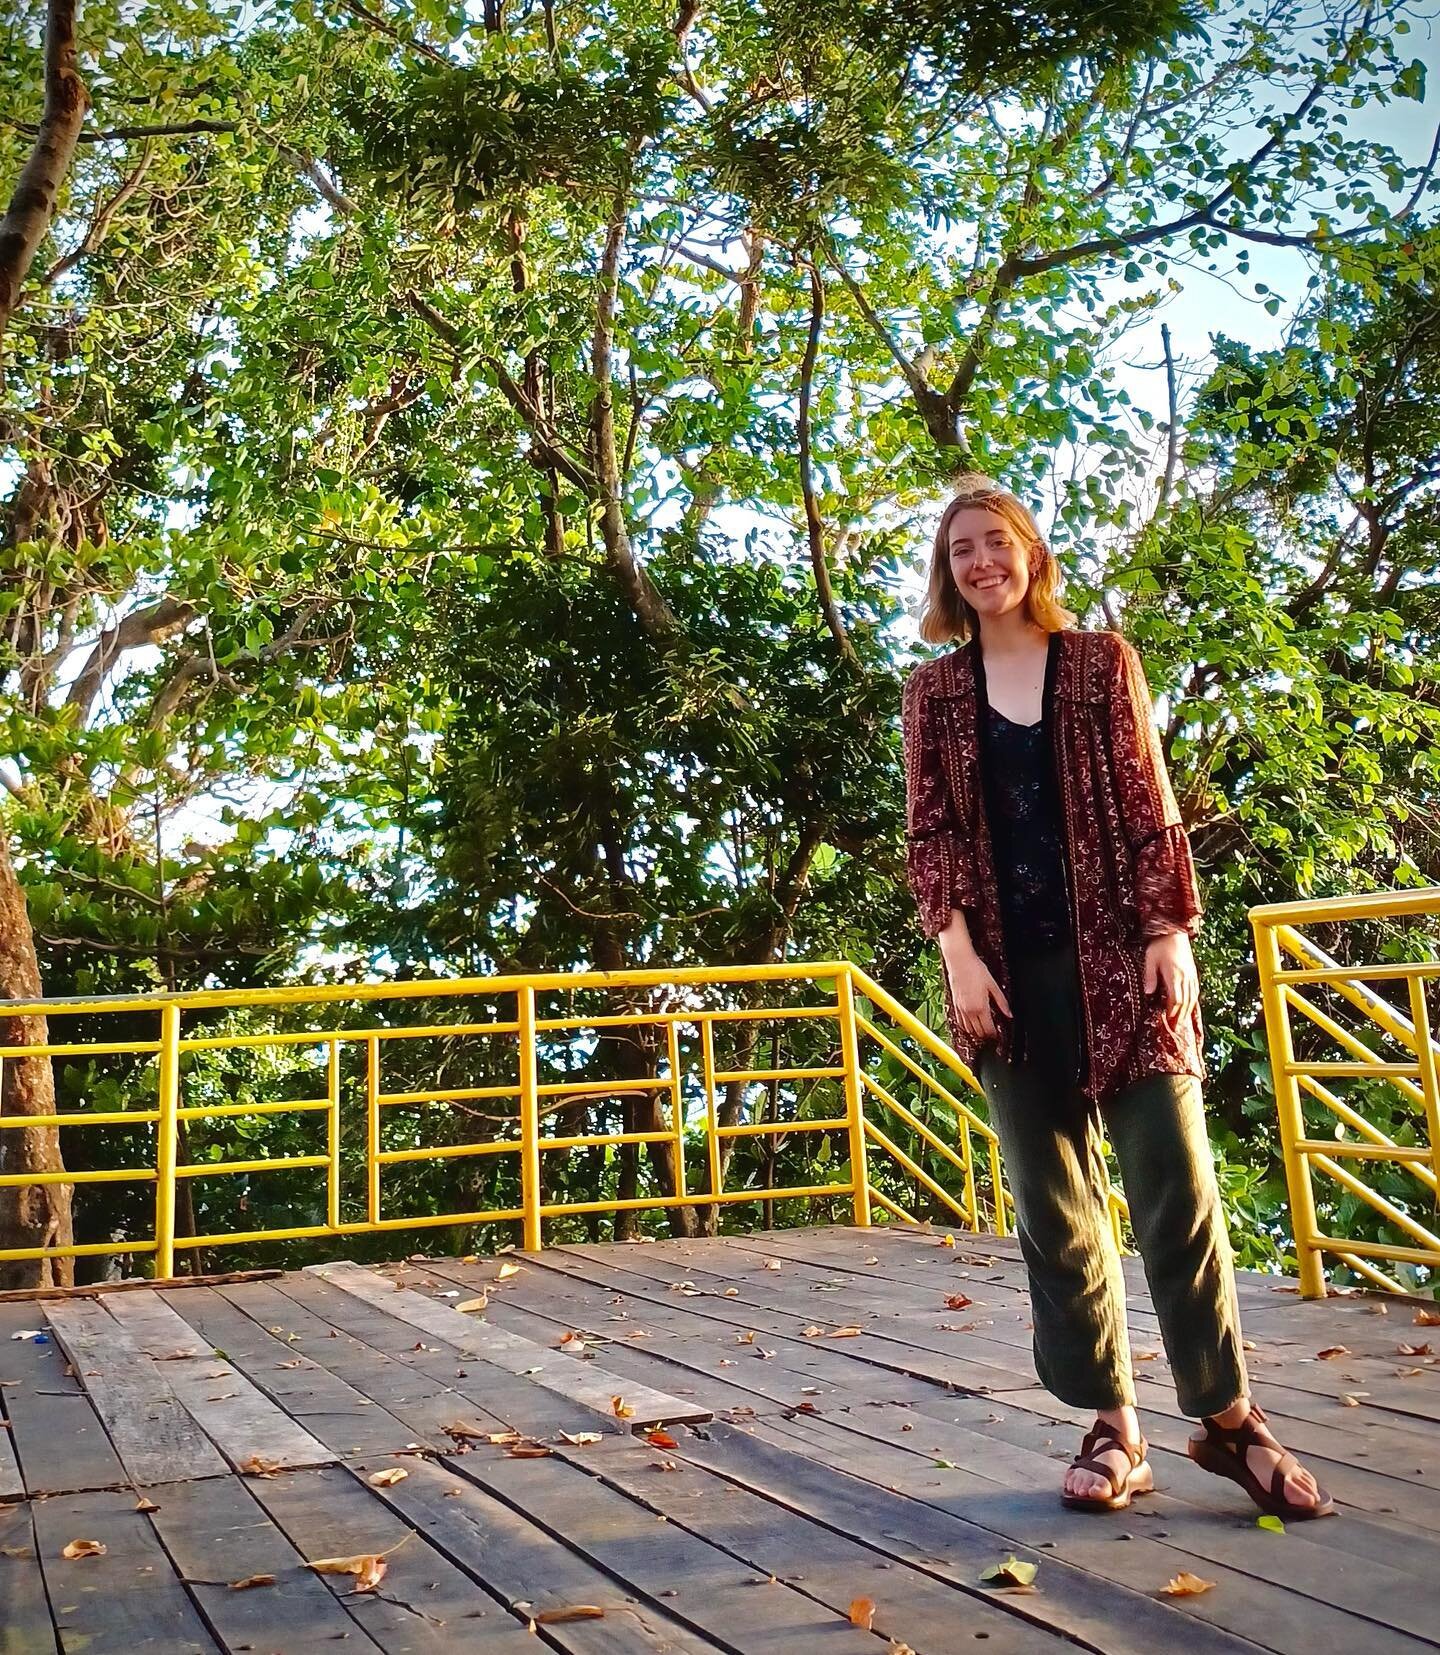 Hi everyone!! My name is Luci Ostheimer (she/her) and I&rsquo;ll be showing you around Banda Aceh this week! I&rsquo;ve been here for over a month now and have been having such a wonderful time!! 

Here are a few highlights of my time here so far:

1